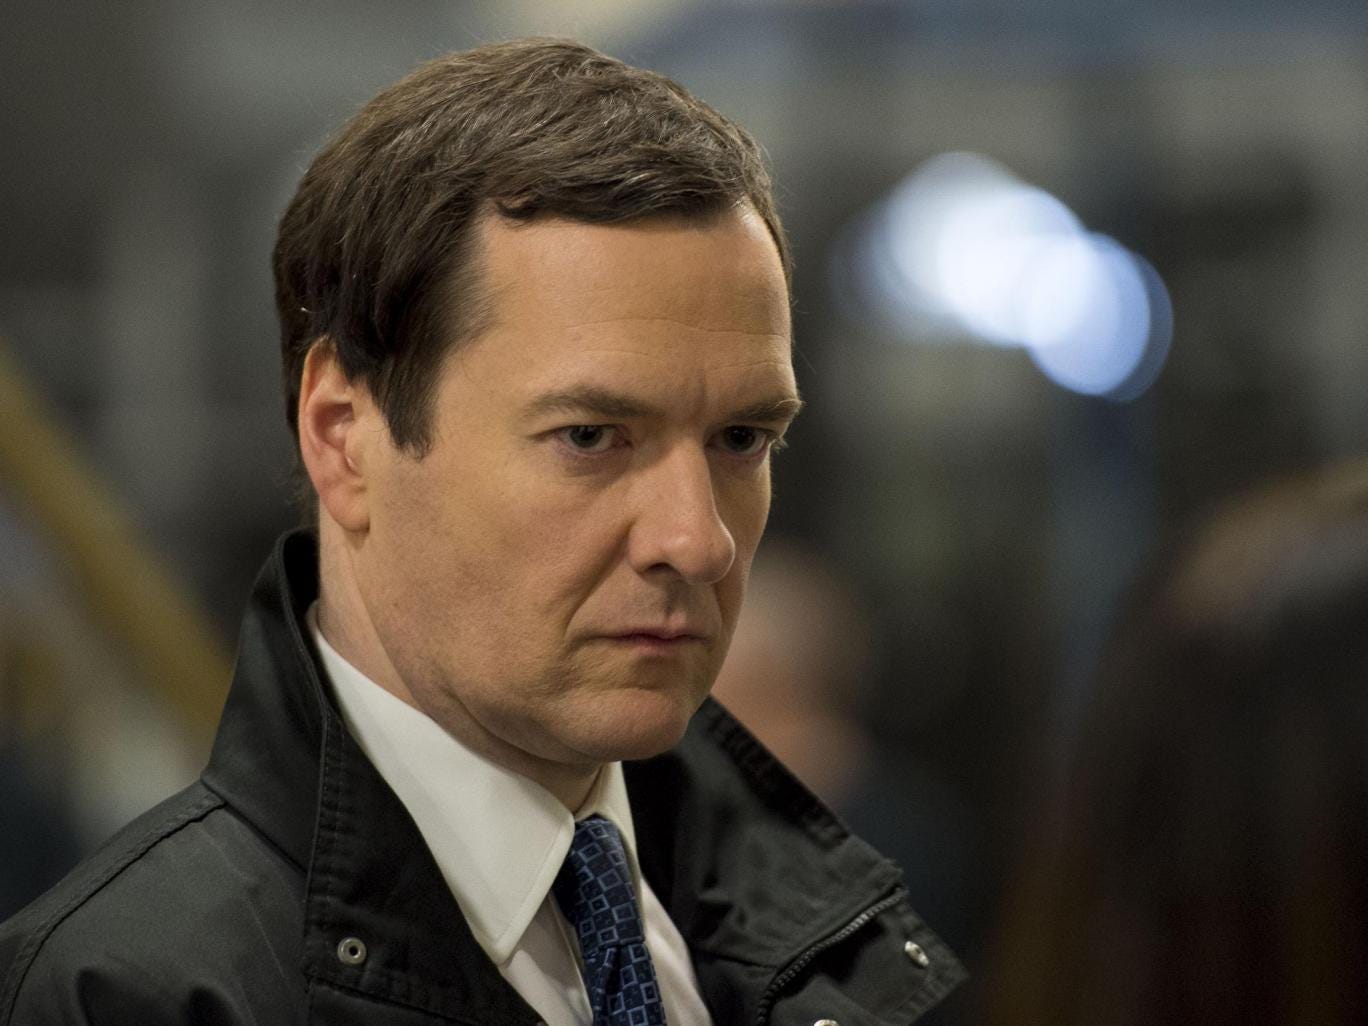 George Osborne wants to be the next Foreign Secretary, it has been claimed